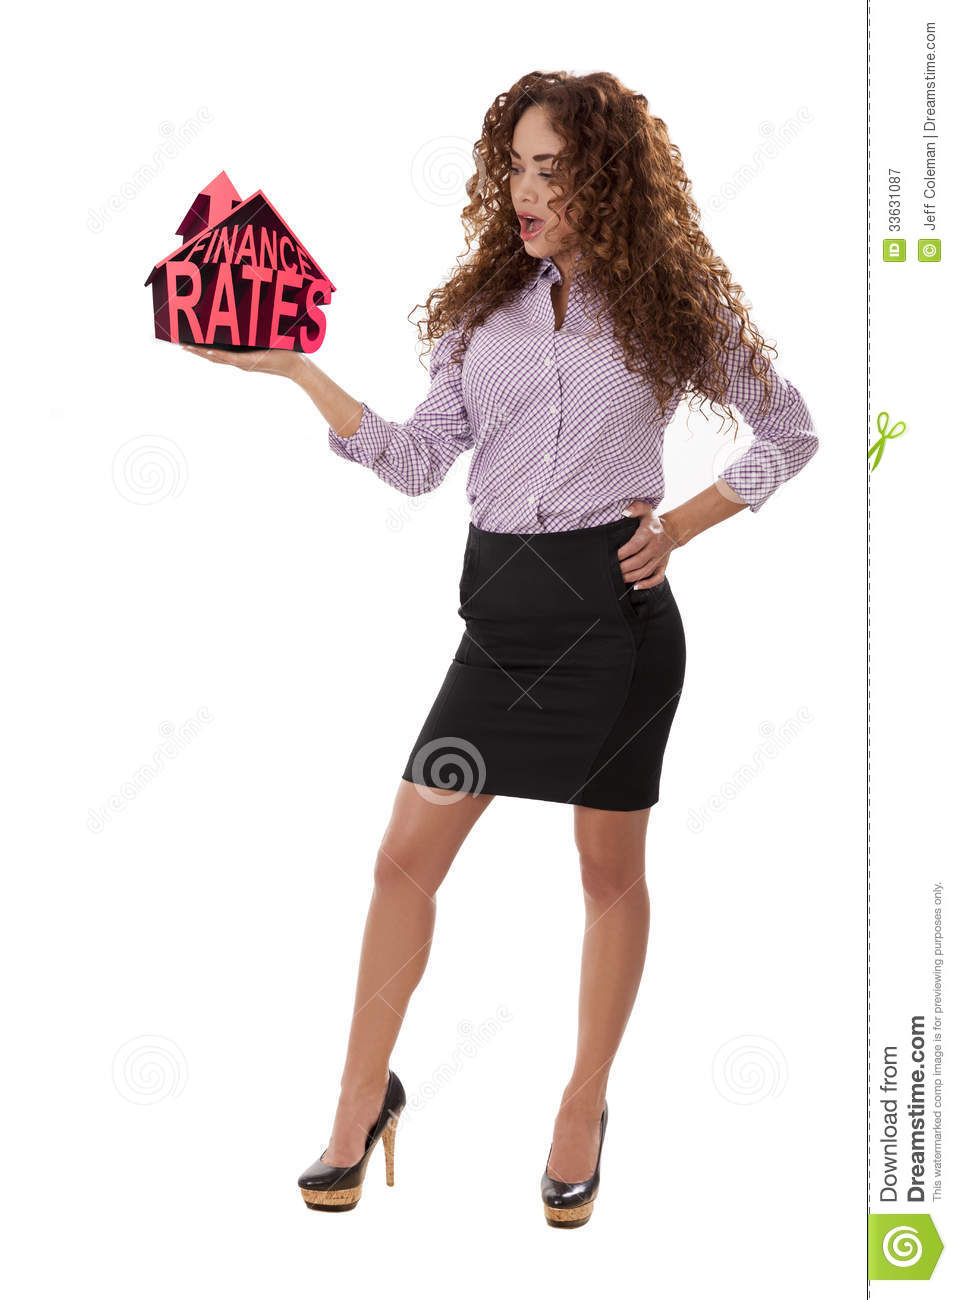 Young Professional Holds The Words Finance Rates In Her Hand Isolated